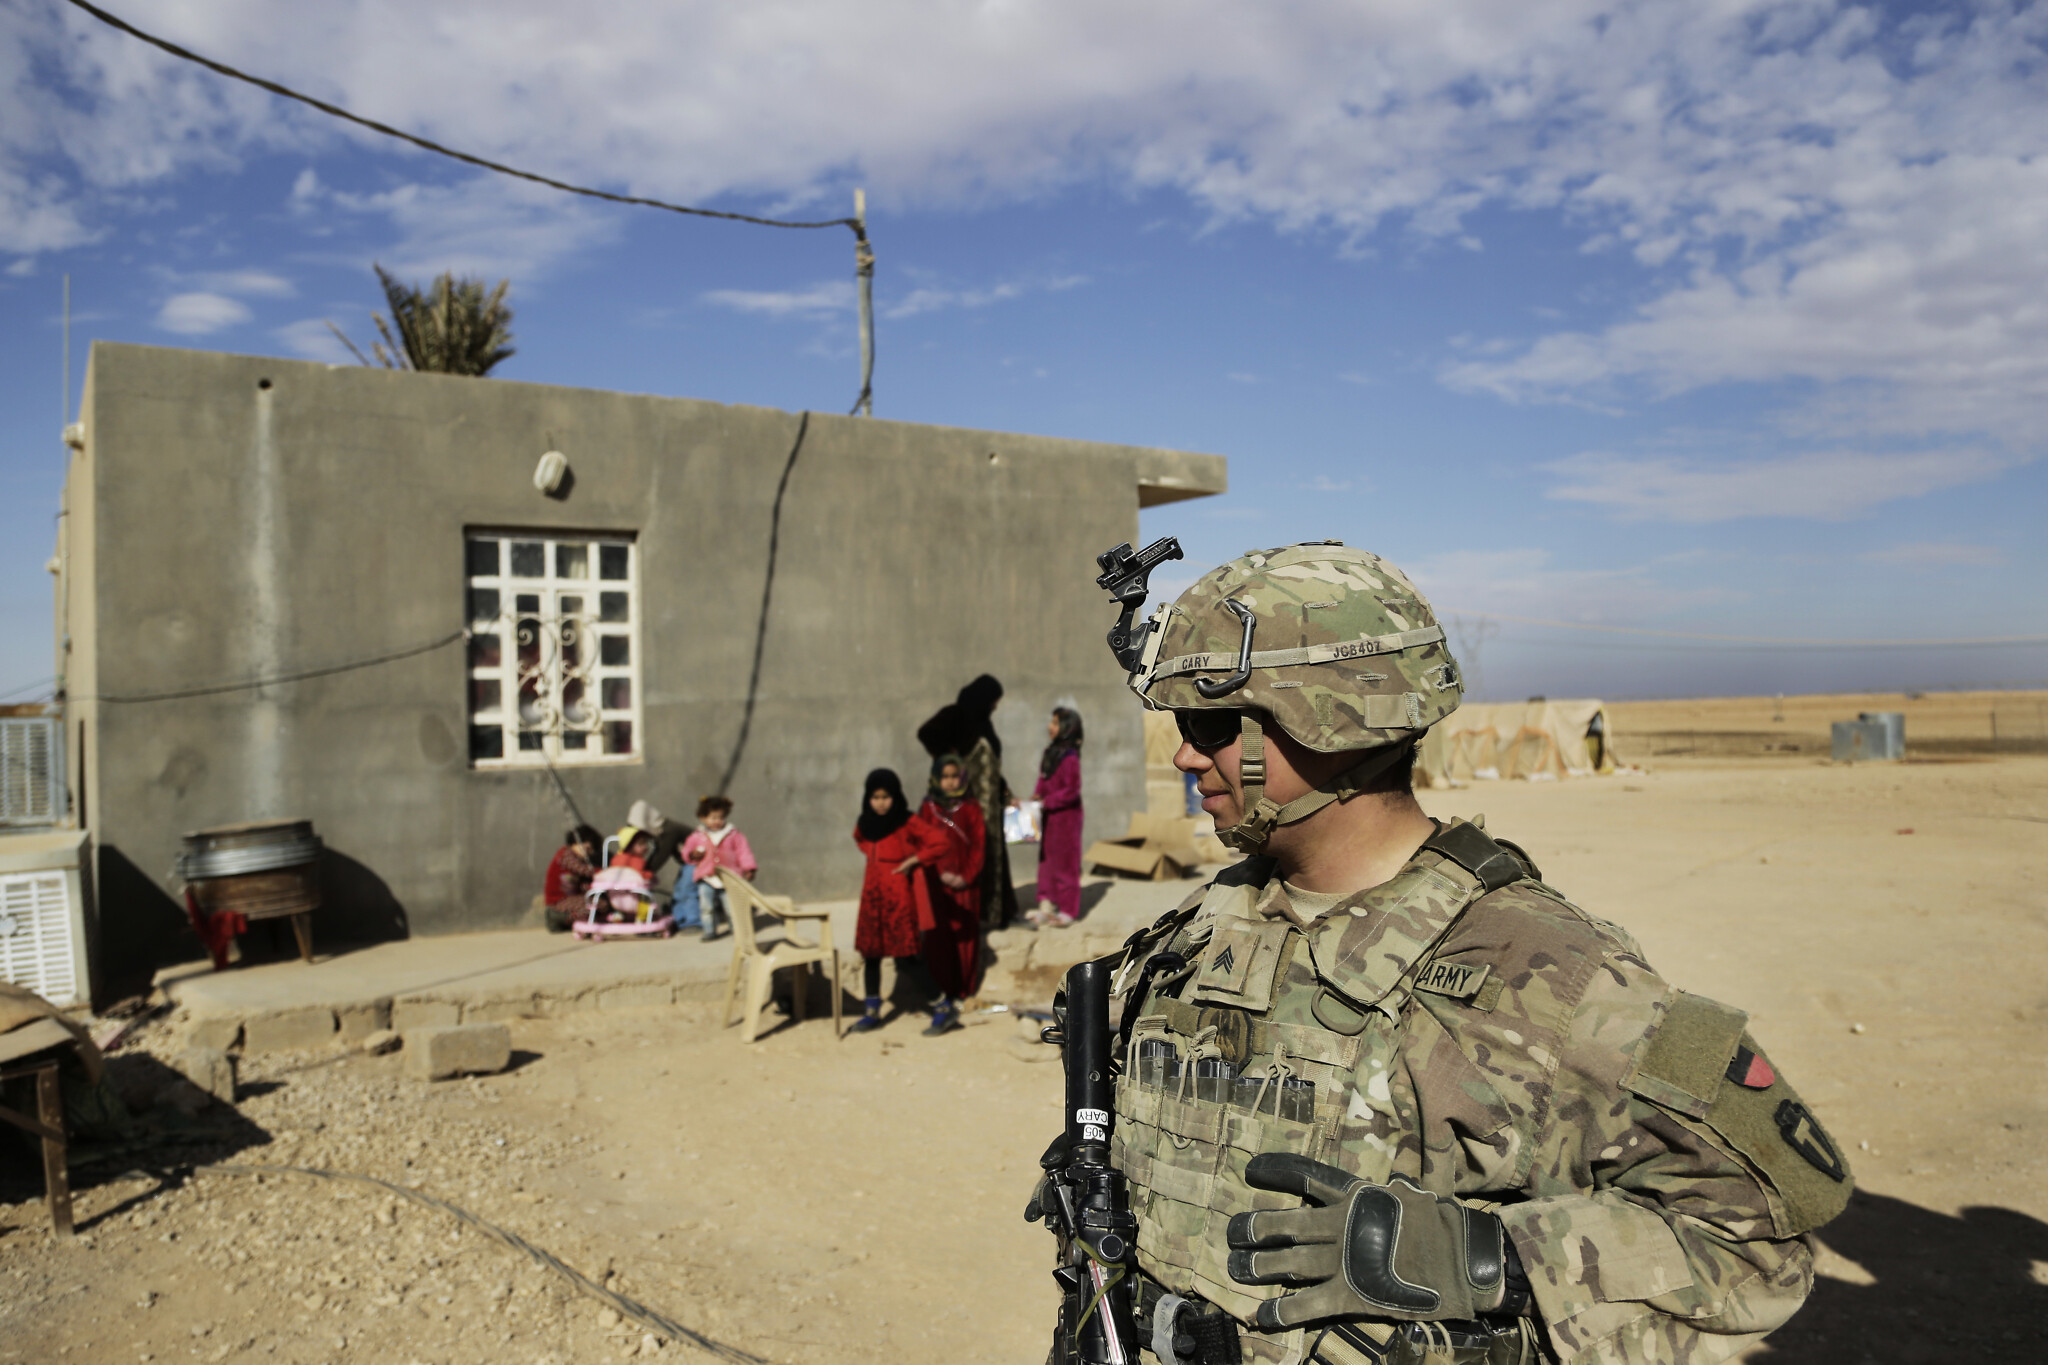 FILE - In this Jan. 27, 2018, file photo, U.S. Army soldiers speak to families in rural Anbar on a reconnaissance patrol near a coalition outpost in western Iraq. Iraq’s president has slammed comments by U.S. President Donald Trump who he says he wants to keep U.S. troops in Iraq “to watch Iran.” Barham Salih said Monday, Feb. 4, 2019 that Trump did not ask Iraq’s permission for American troops stationed there to watch Iran, describing his comments as “strange.”(AP Photo/Susannah George, File)